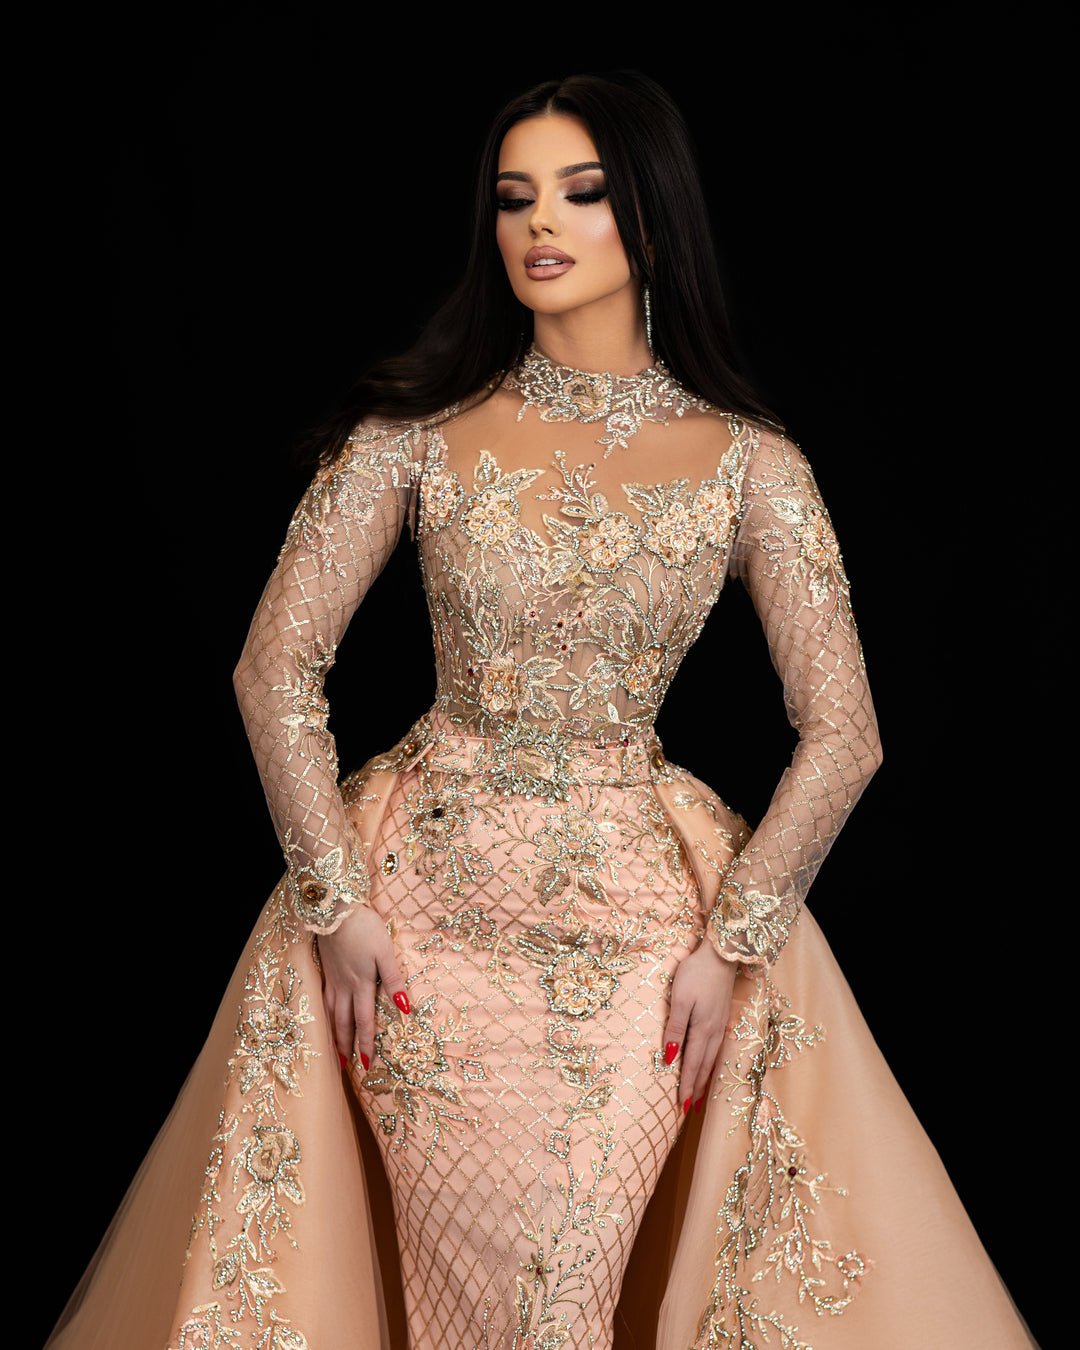 Peesia Peach Dress with Overskirt - Blini Fashion House Crystals